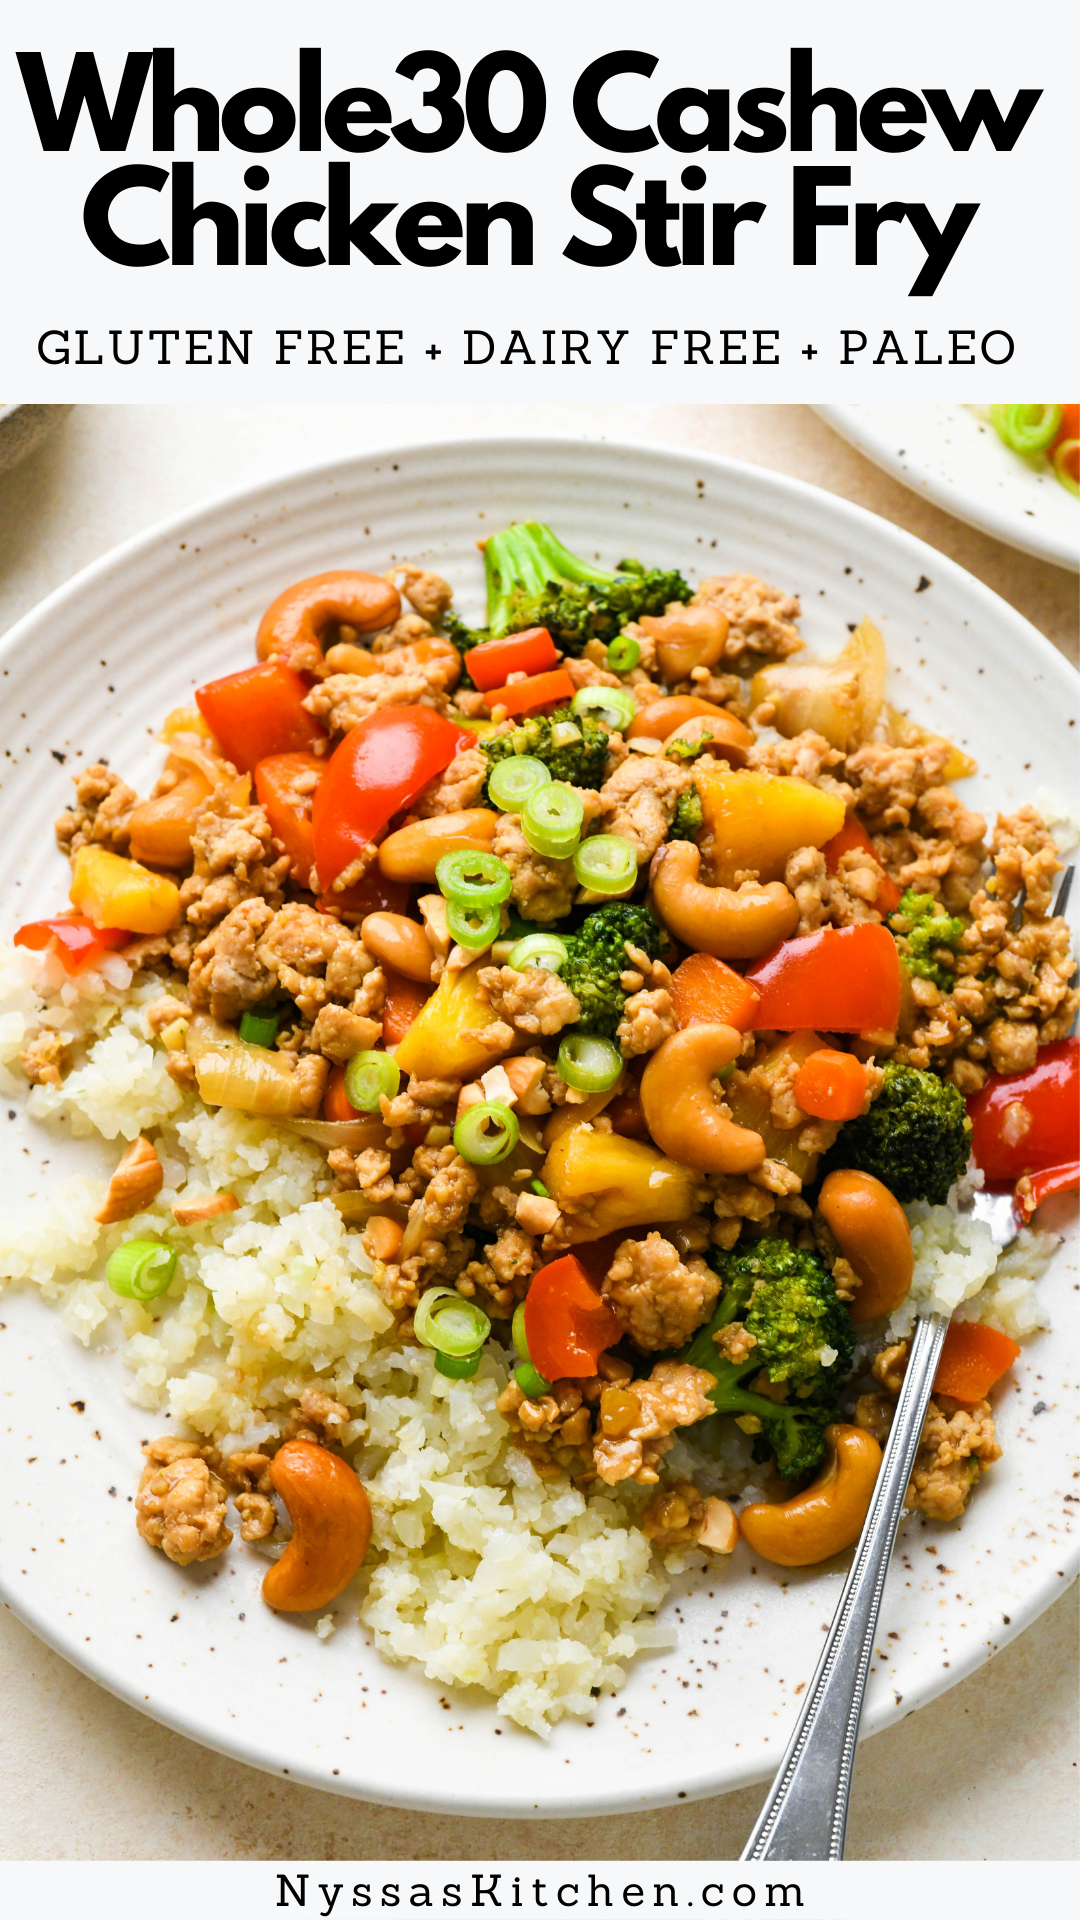 This healthy cashew chicken stir fry is the best weeknight homemade dinner recipe! Made with ground chicken, lots of veggies, pineapple, cashews, garlic, ginger, and a simple stir fry sauce. Ready in 30 minutes and so full of flavor! Whole30, paleo, gluten free, dairy free, soy free.